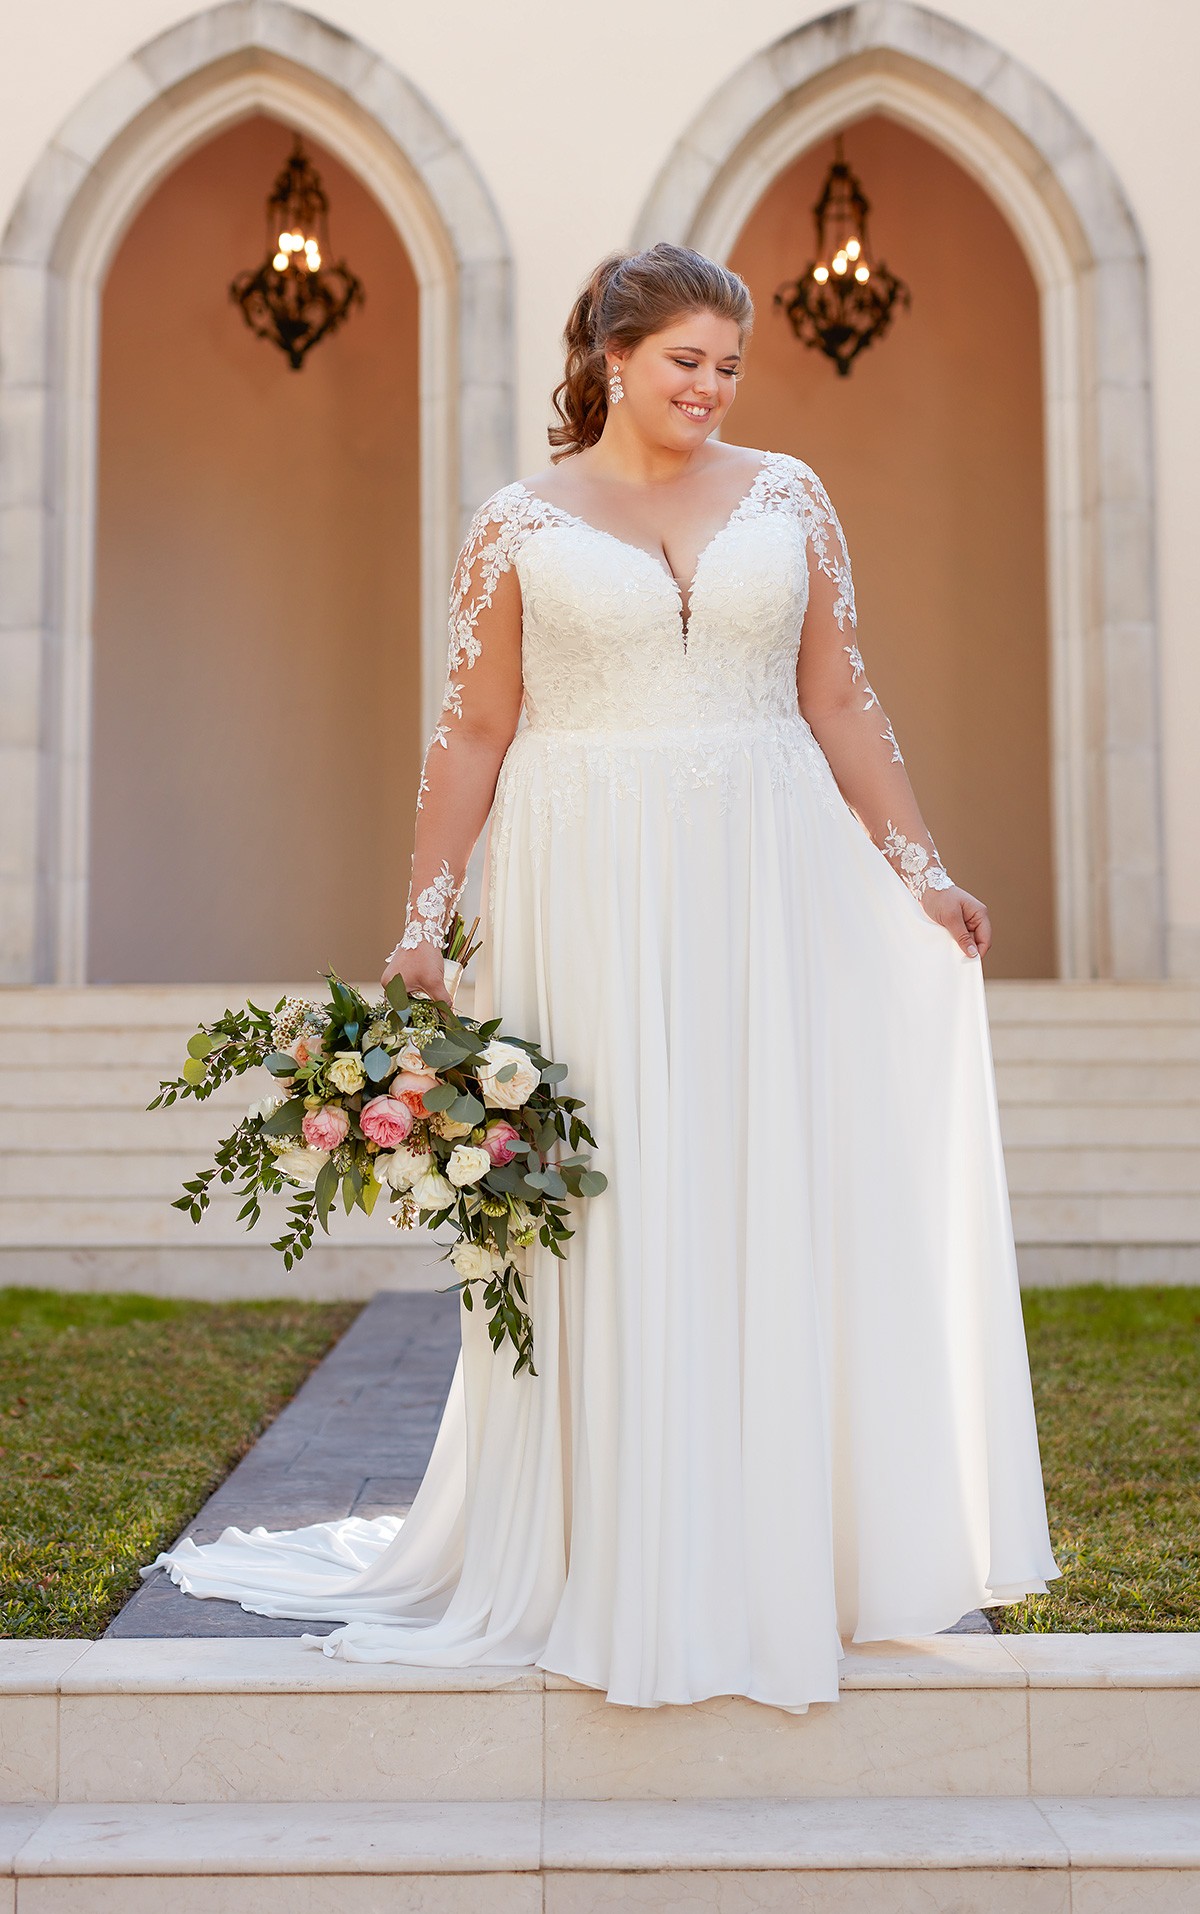 6843 - Alandra - Stella York 6843 Beautiful lightweight Satin/Chiffon dress with lace detail bodice and long Illusion lace sleeves. Plus size wedding dress at Blessings Bridal Shop, 3 Loyal Parade, Mill Rise, Westdene, Brighton. East Sussex. Bn1 5GG T:01273 505766 E:info@blessingsbridal.co.uk